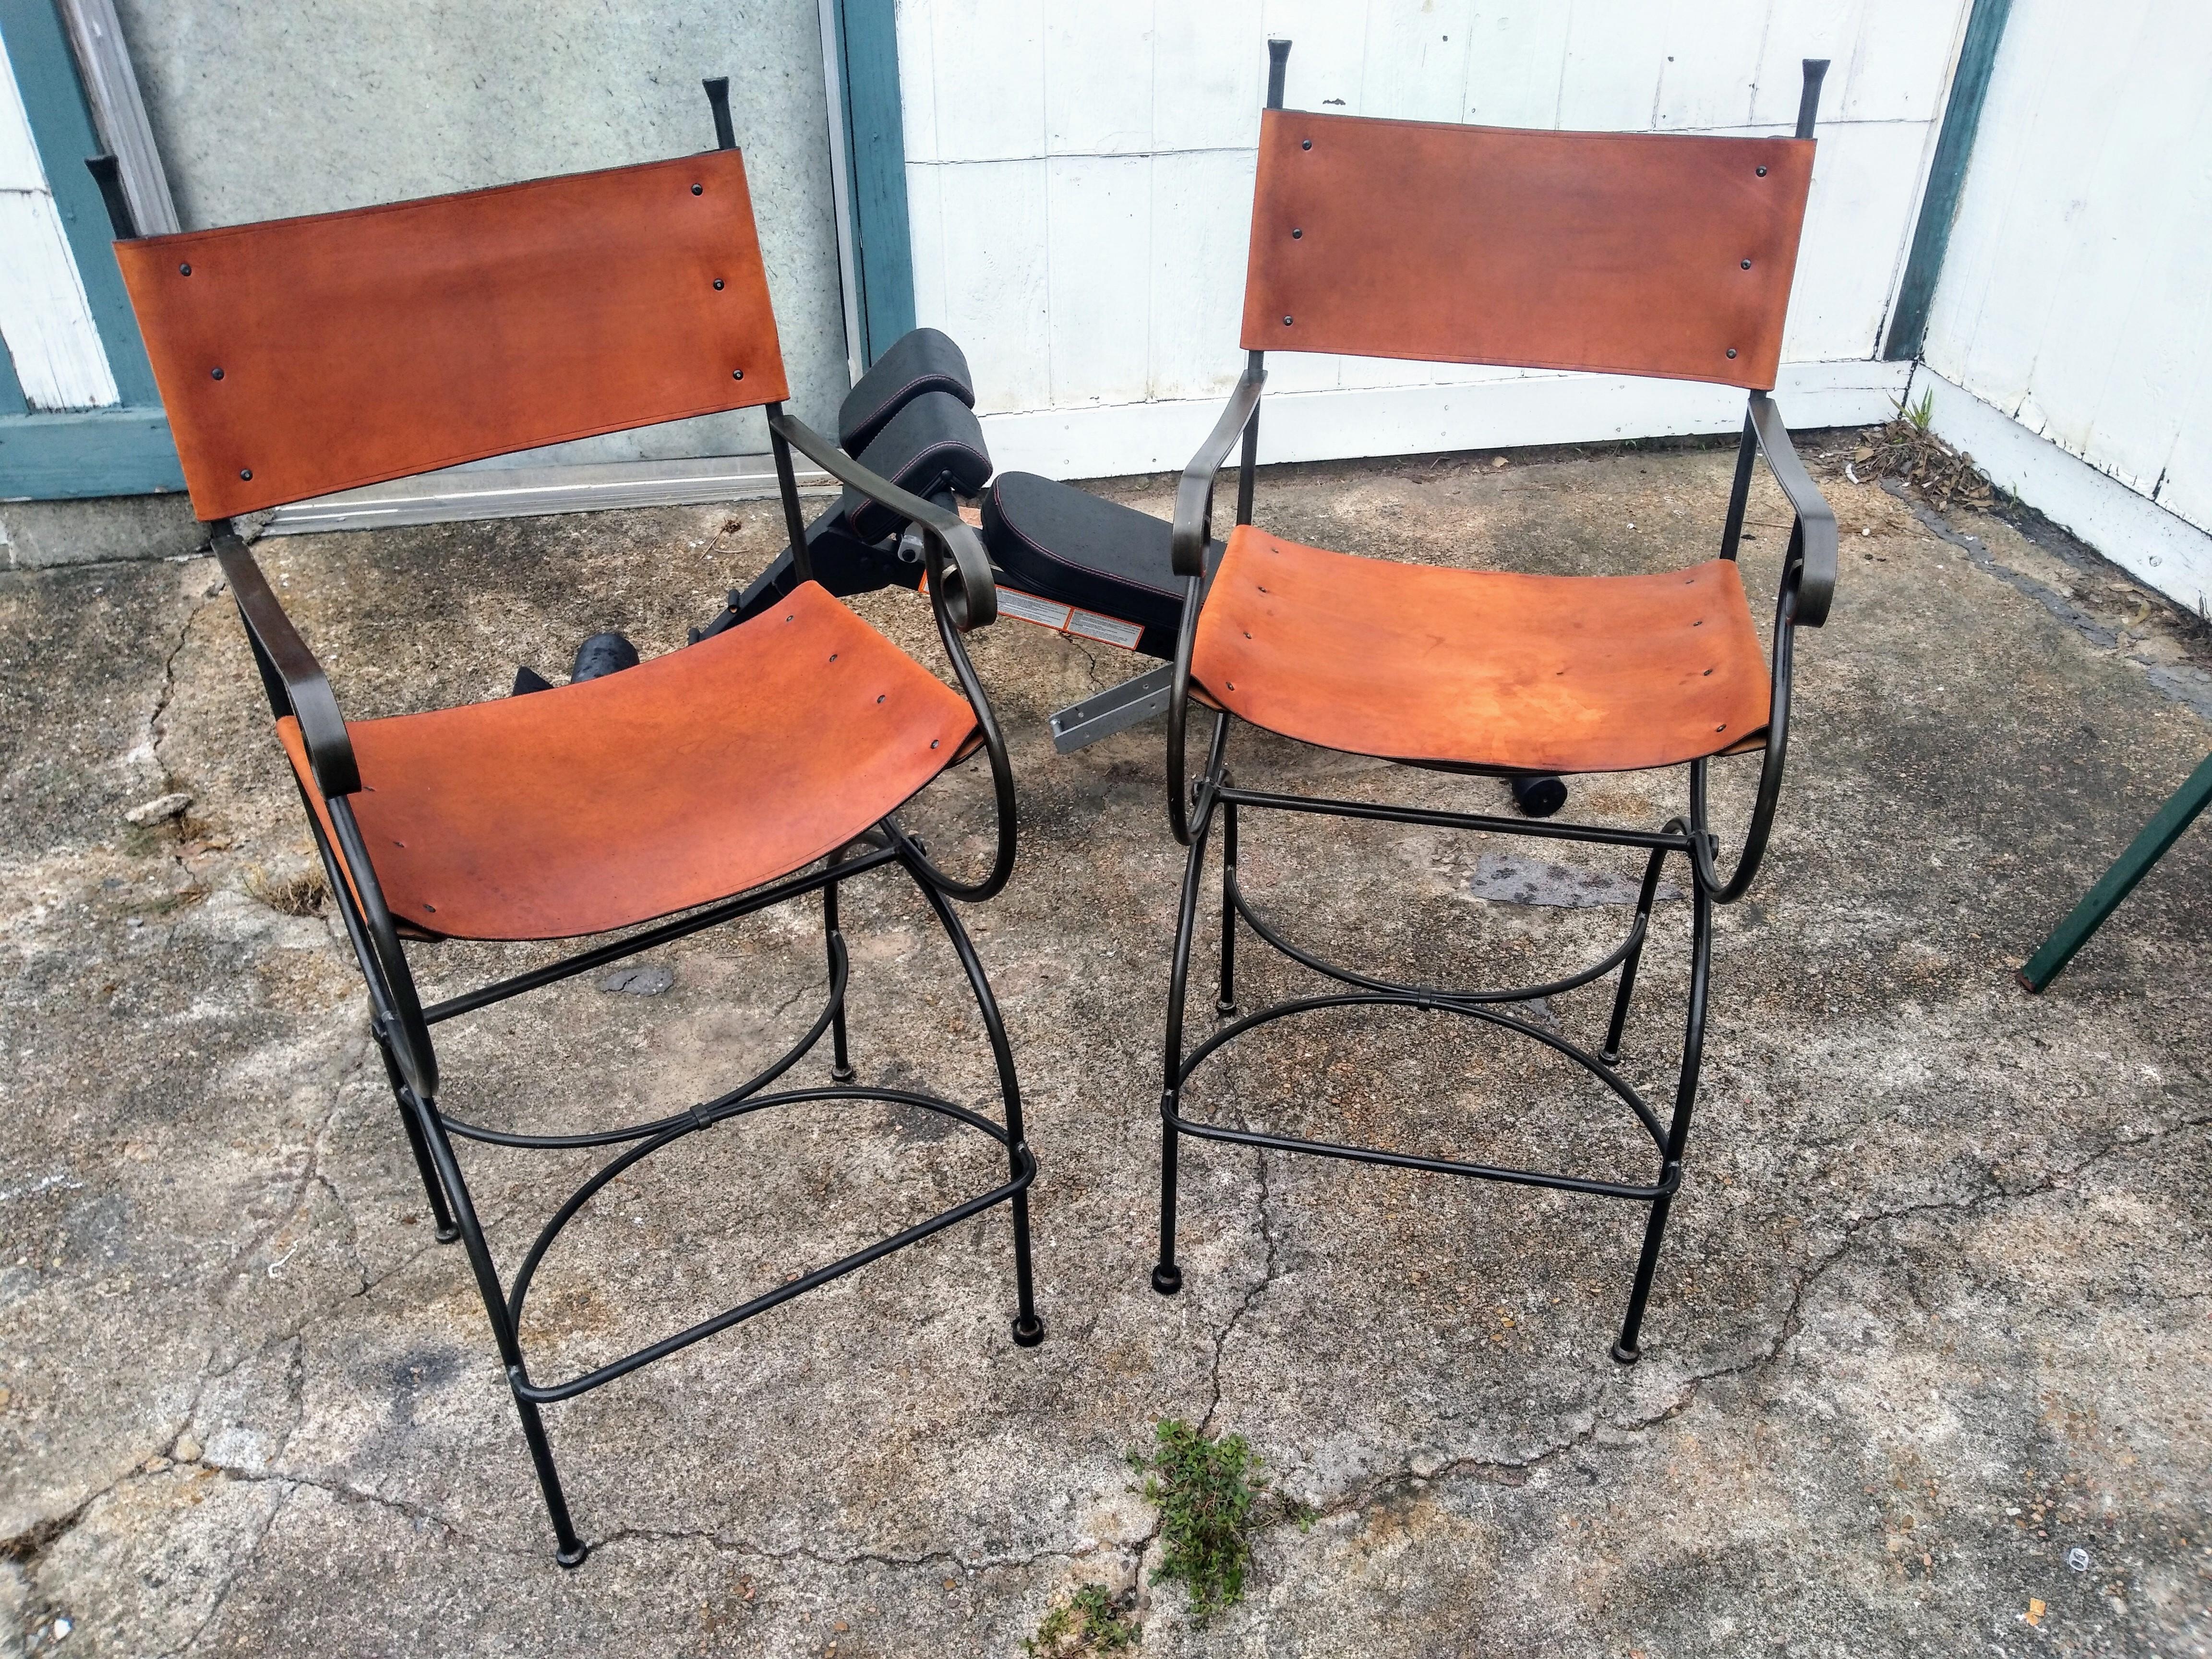 Pair of Legacy Barstools by Charleston Forge 

A pair of Charleston Forge wrought iron and leather barstools. Forged heavy black wrought iron with caramel leather seats and backs. 
Accented with tapered finials to the posts of the seat backs and